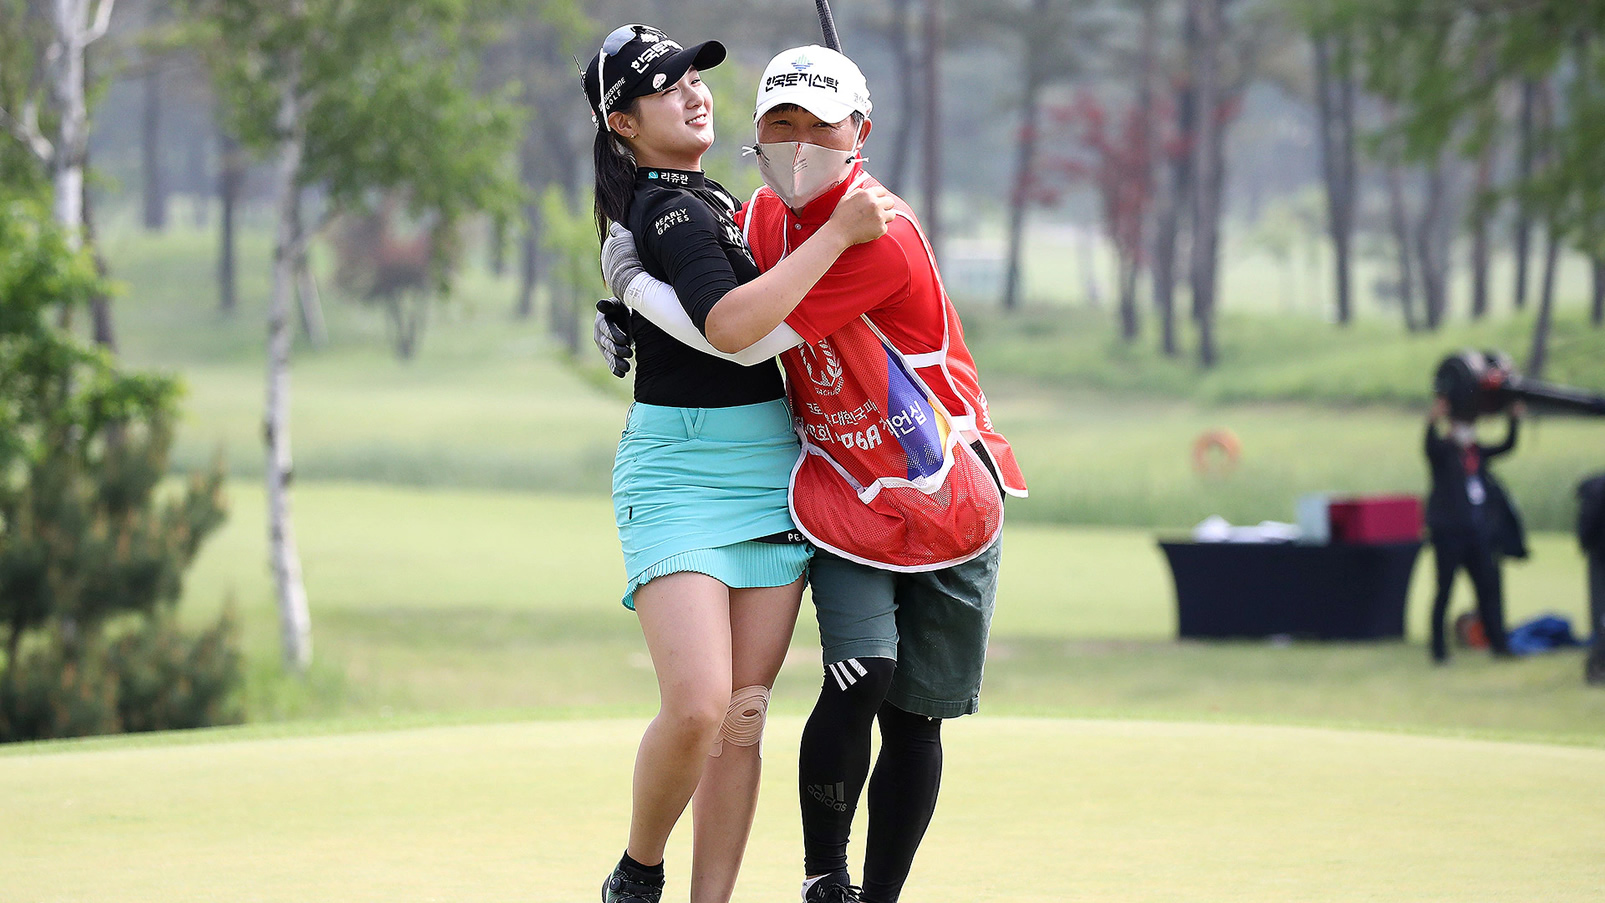 Park wins in golf’s return to action in South Korea